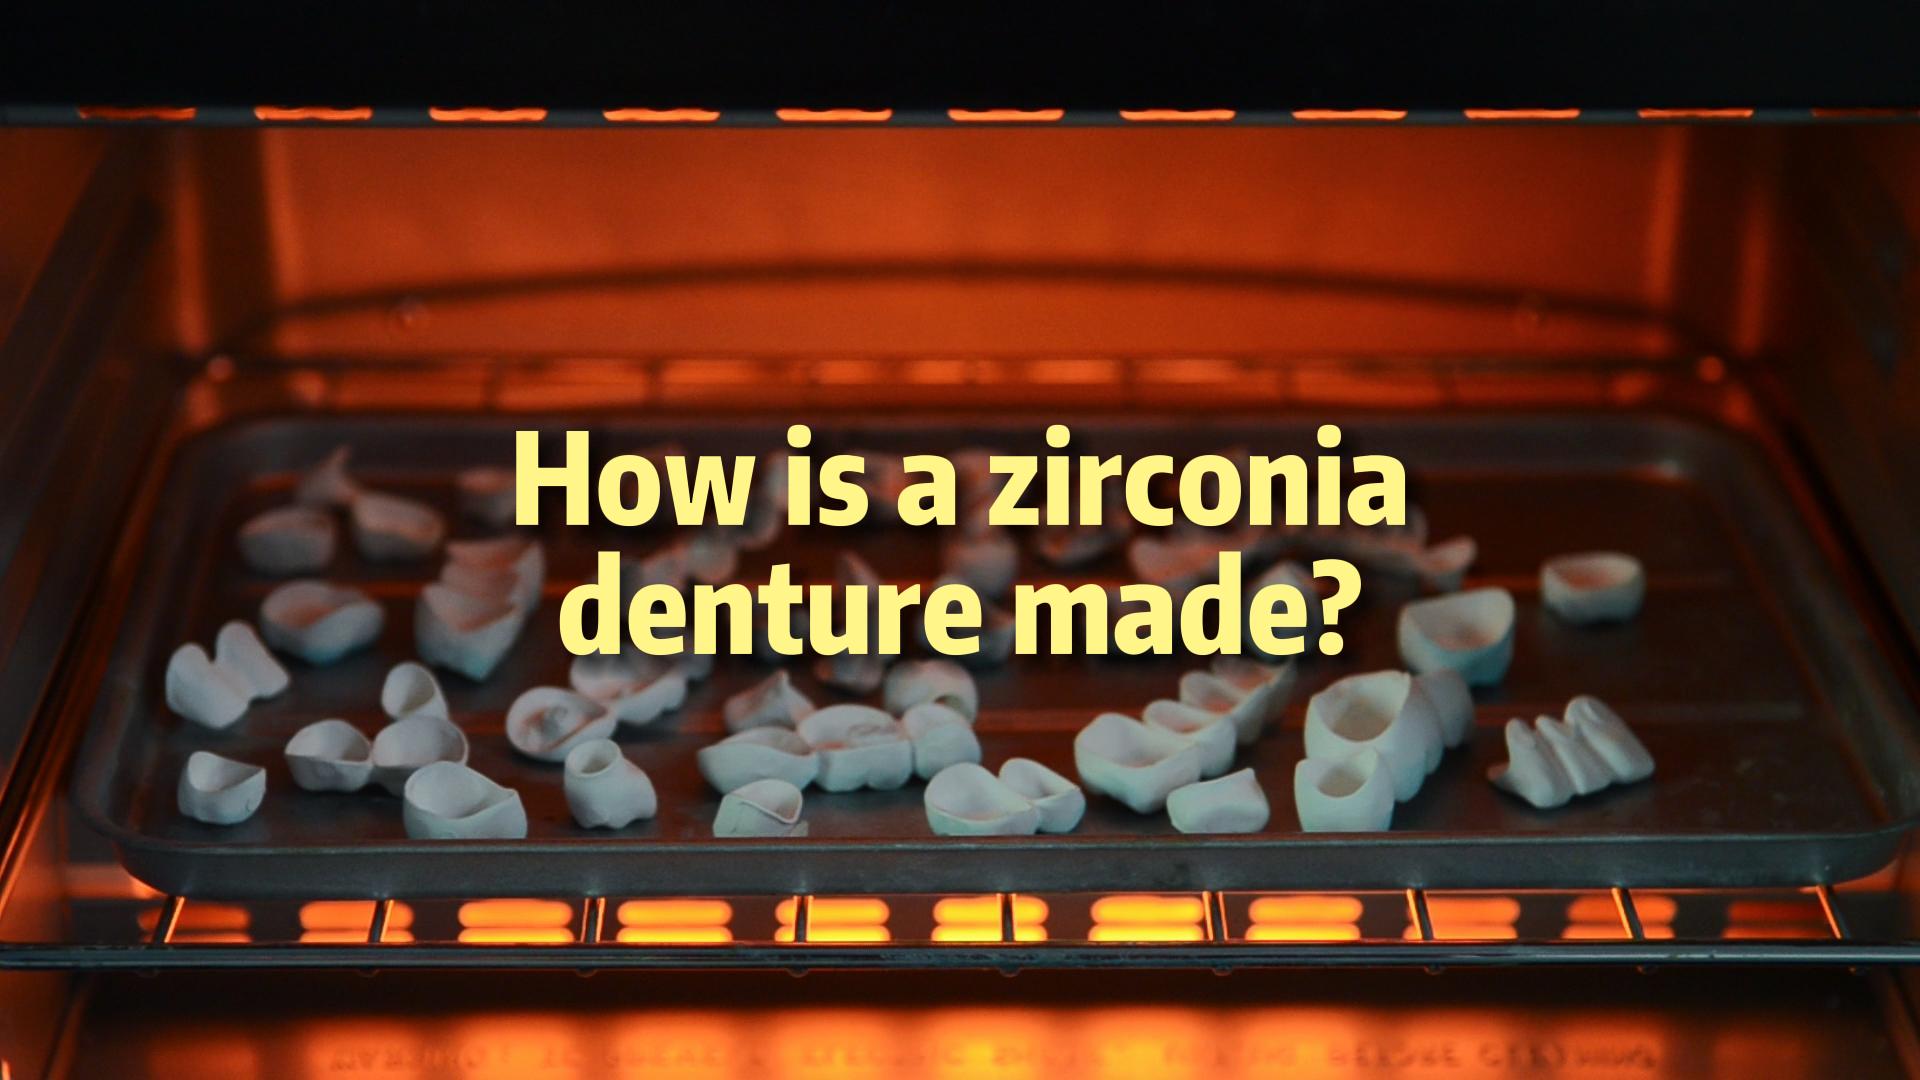 How to produce a zirconia prosthesis